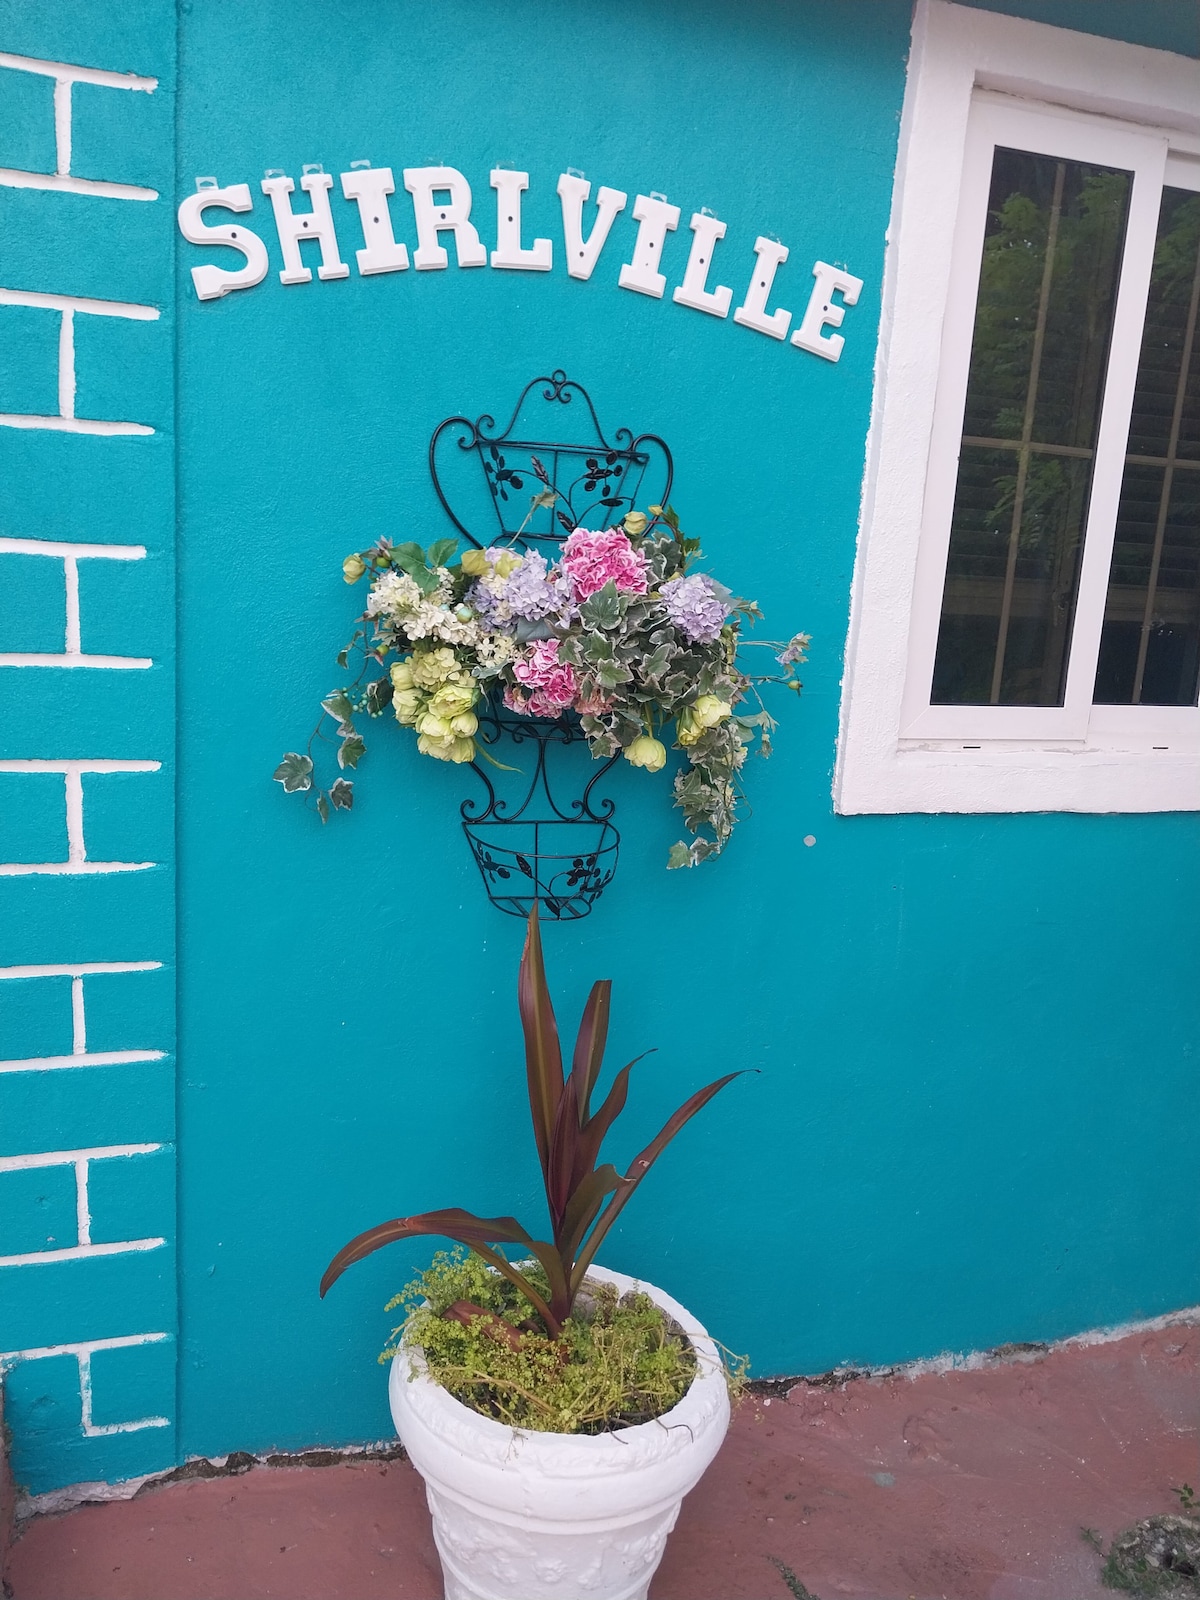 Welcome to Shirlville!